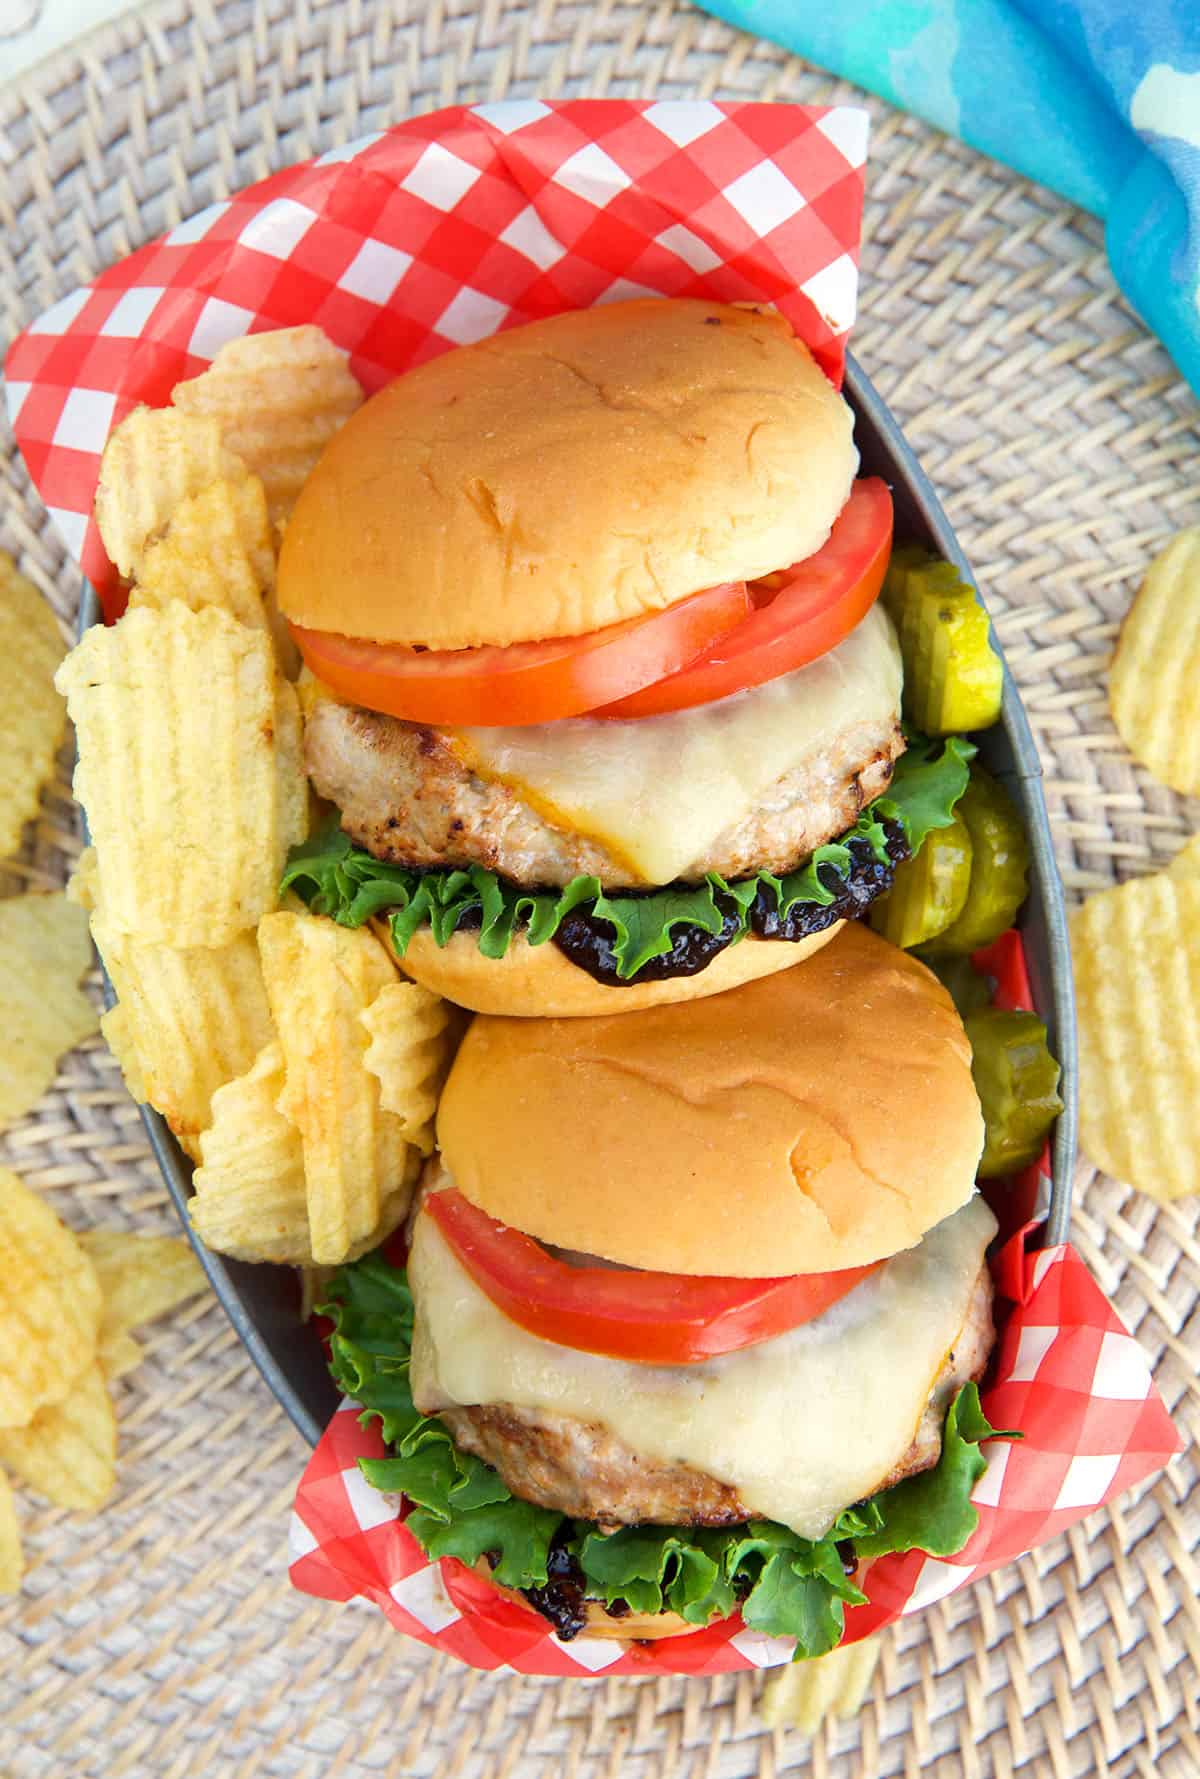 Two turkey burgers are plated with potato chips in a basket.